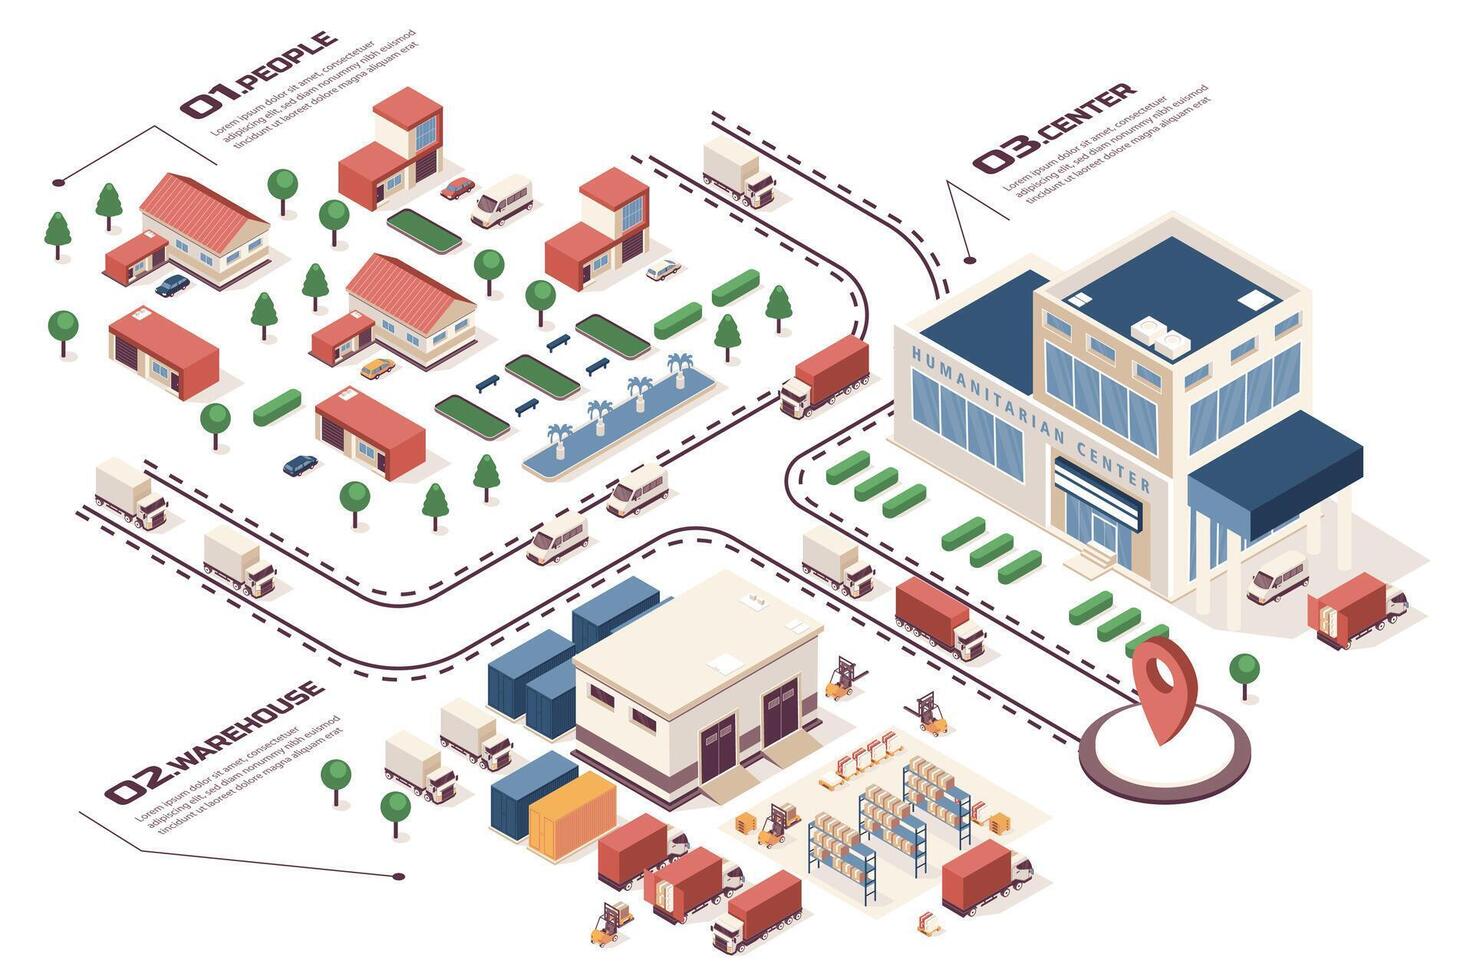 Humanitarian support concept 3d isometric web infographic workflow process. Infrastructure map with buildings, warehouse, volunteer center, delivery. Vector illustration in isometry graphic design